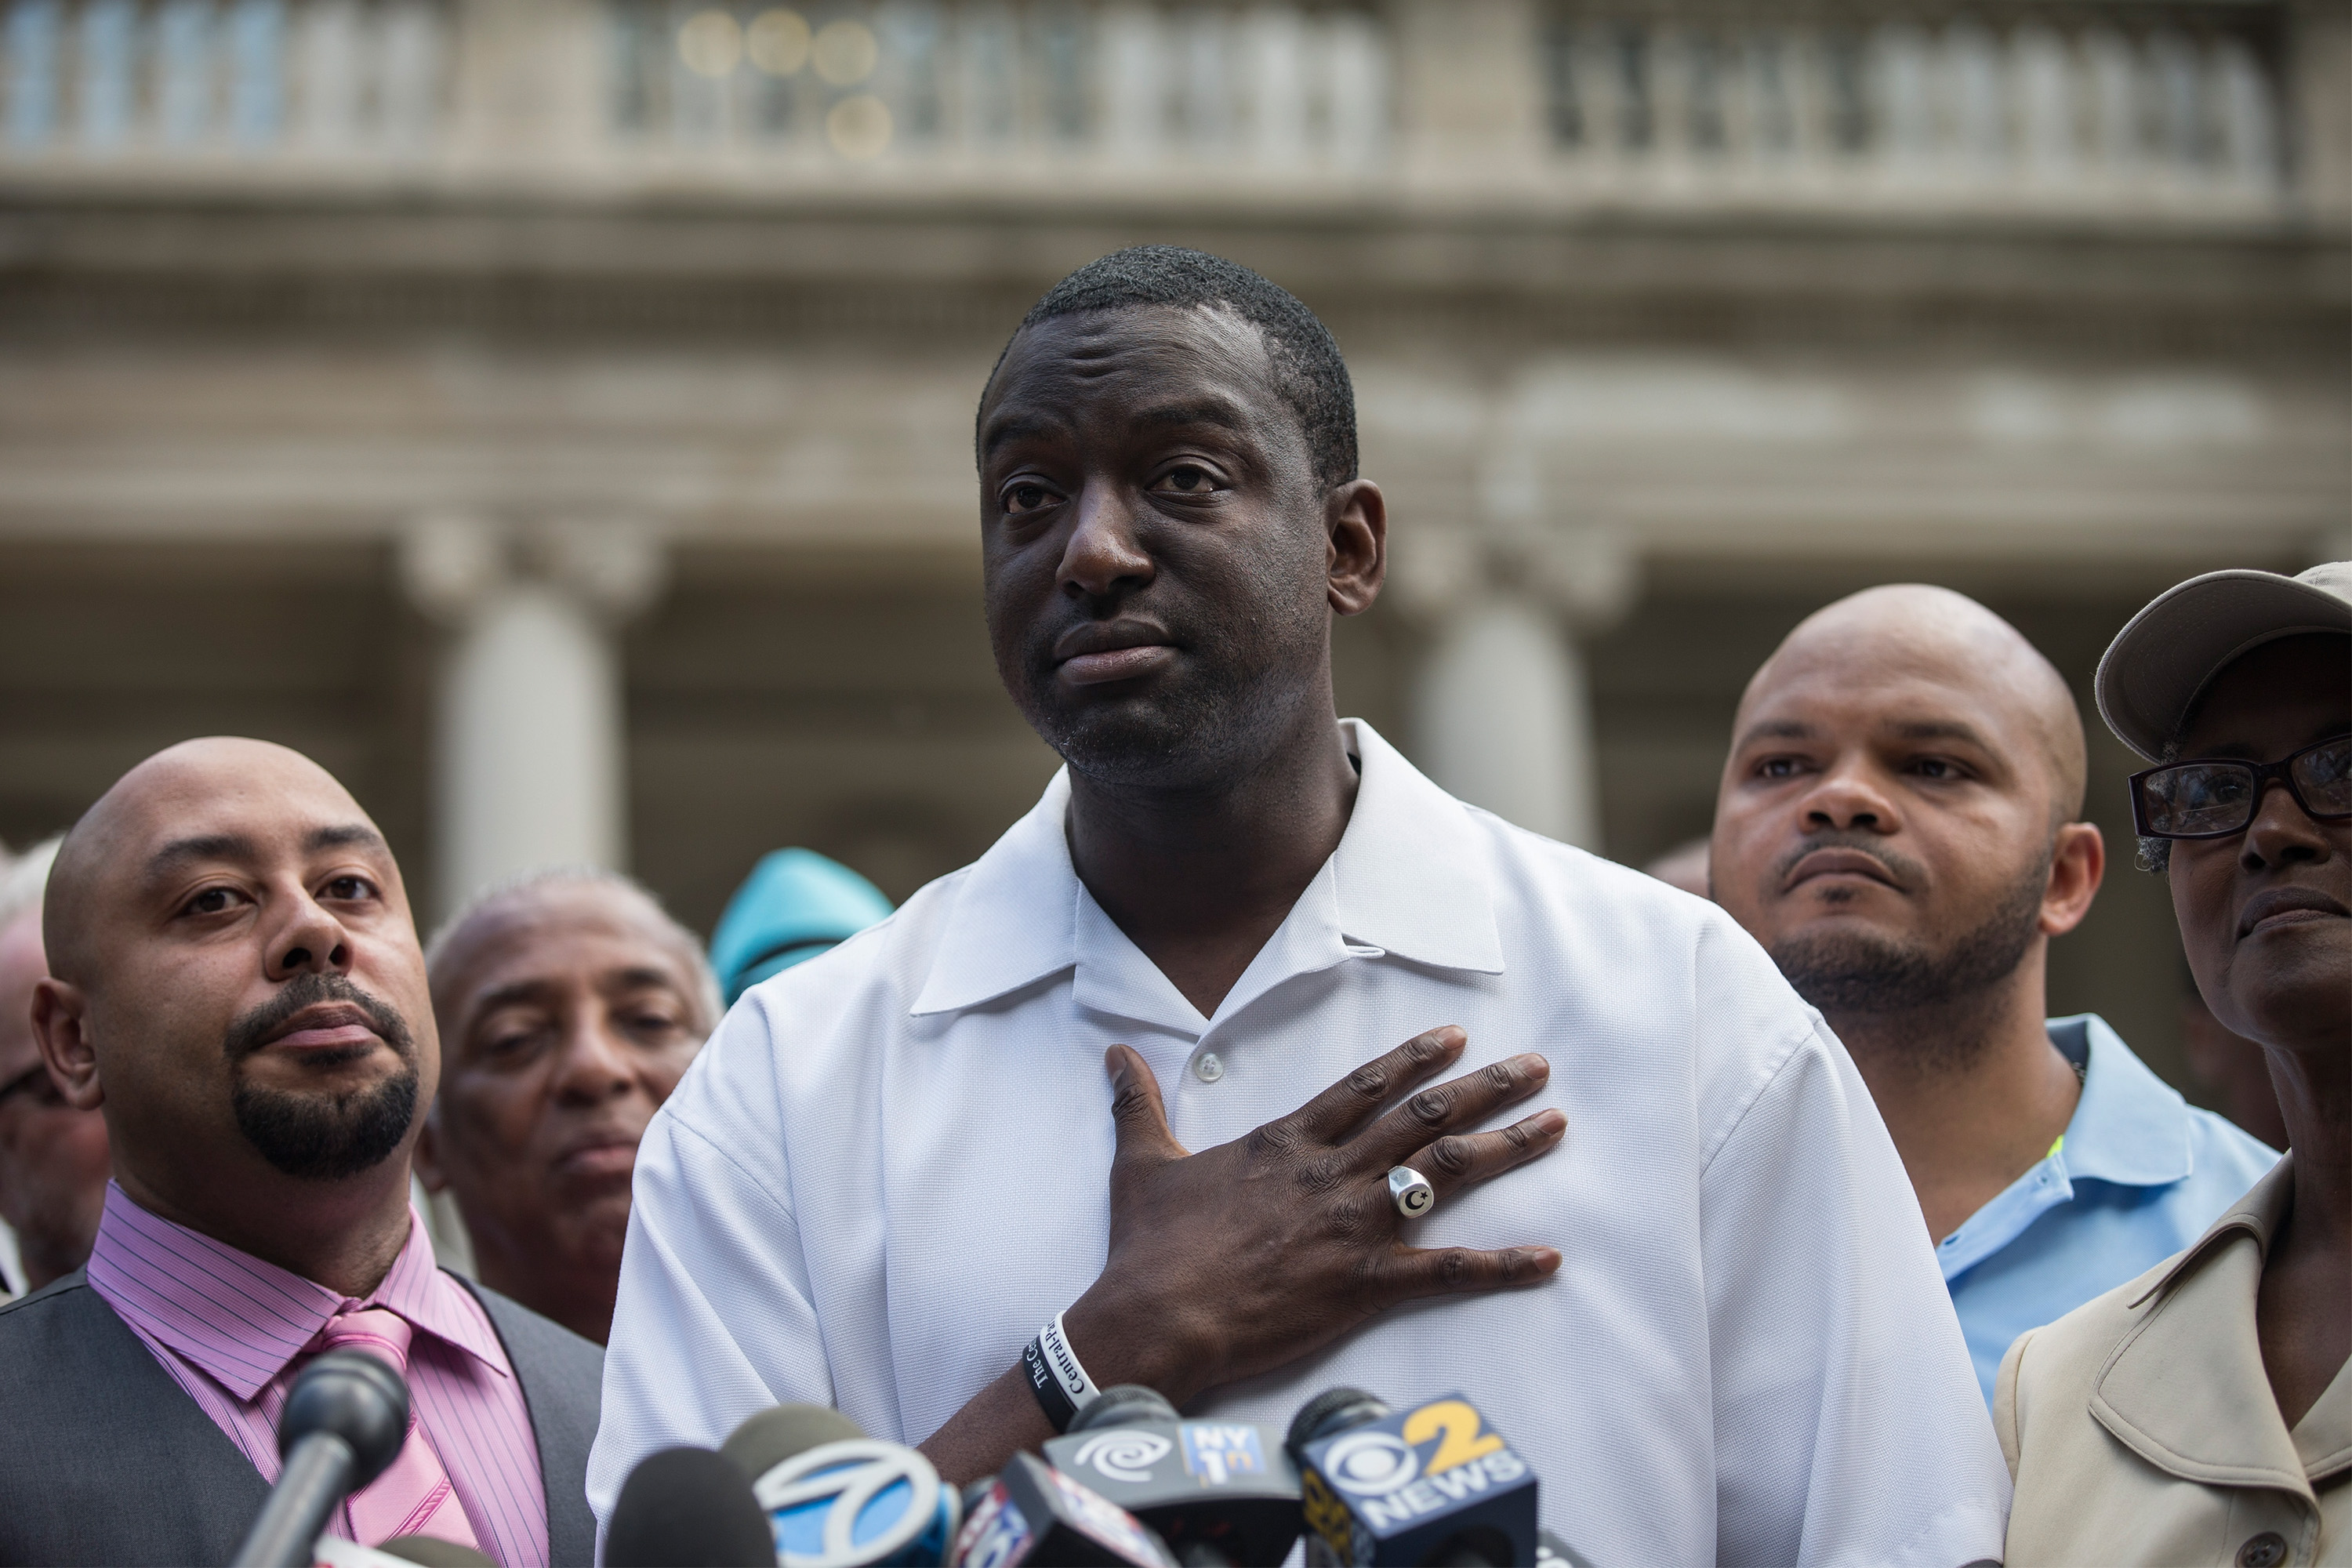 Yousef Salaam, How Many Stops Act, NYPD, Stops, car, councilman